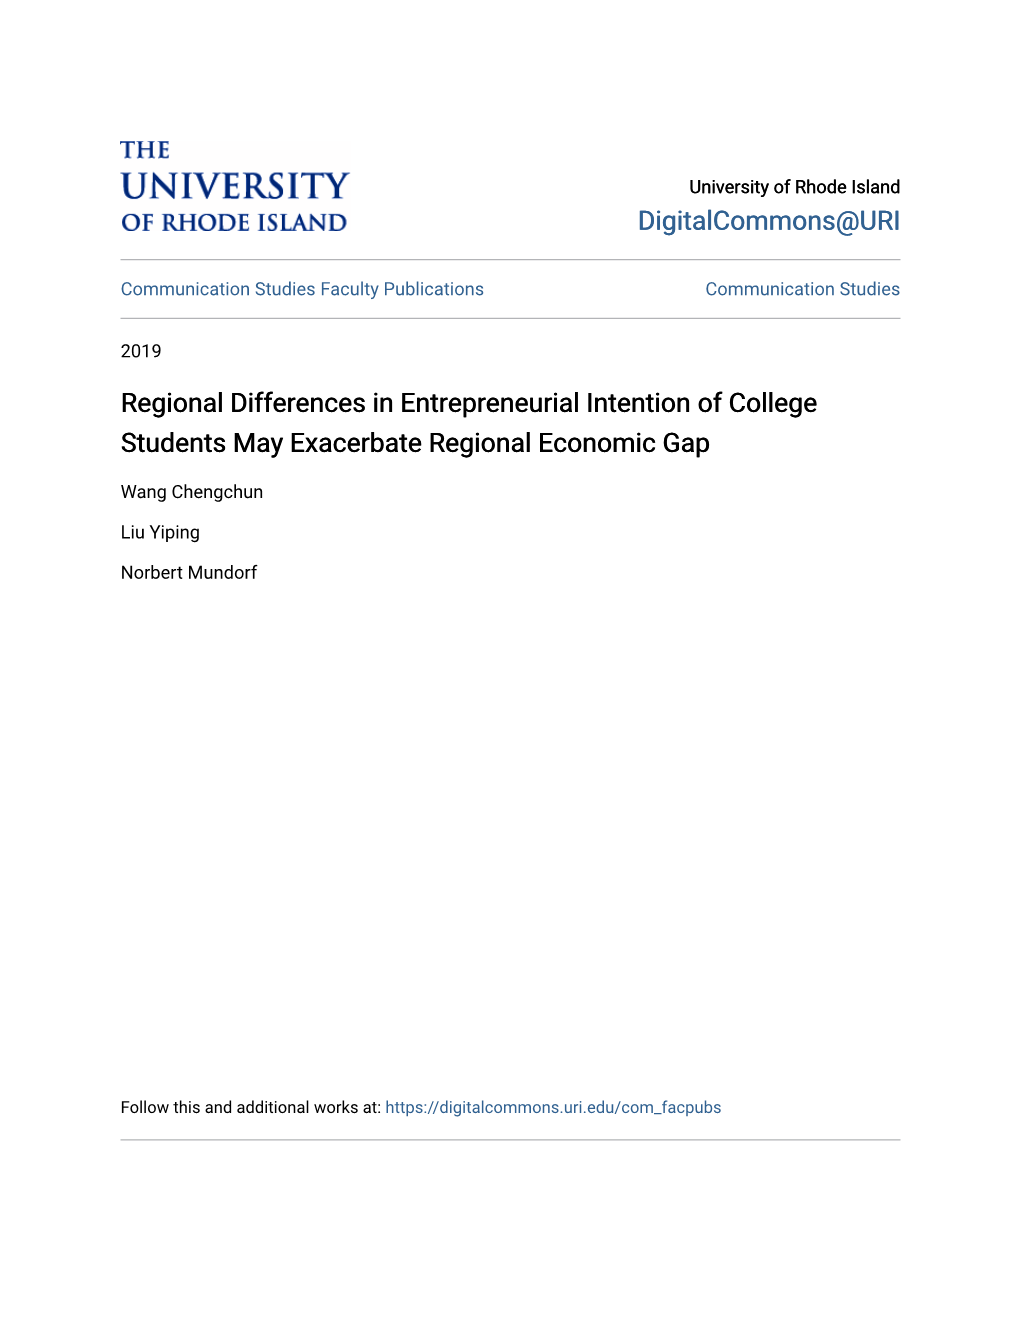 Regional Differences in Entrepreneurial Intention of College Students May Exacerbate Regional Economic Gap